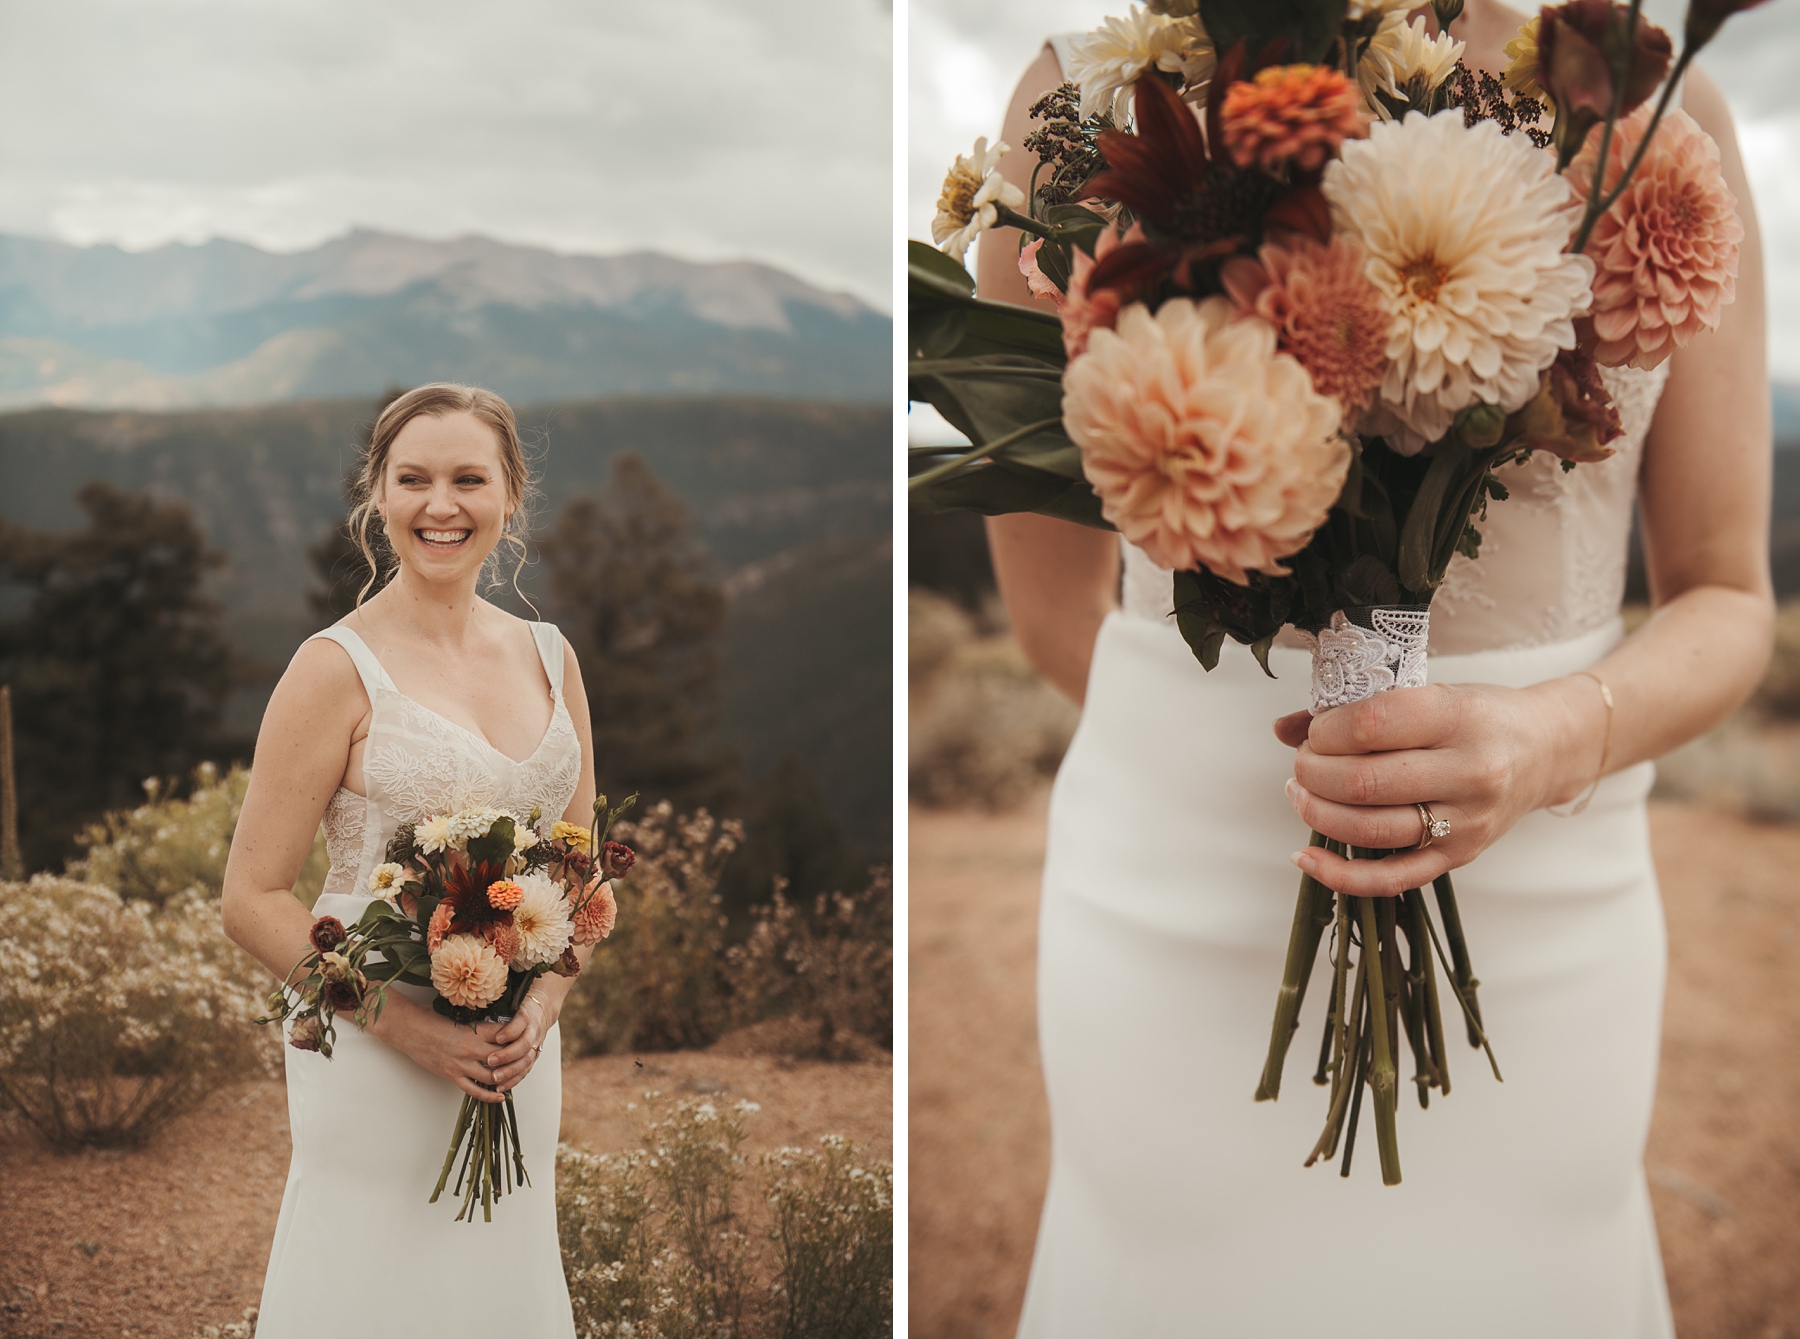 Bride carrying asymmetrical bouquet full of pink and cream dahlias at Airbnb wedding venue in Colorado